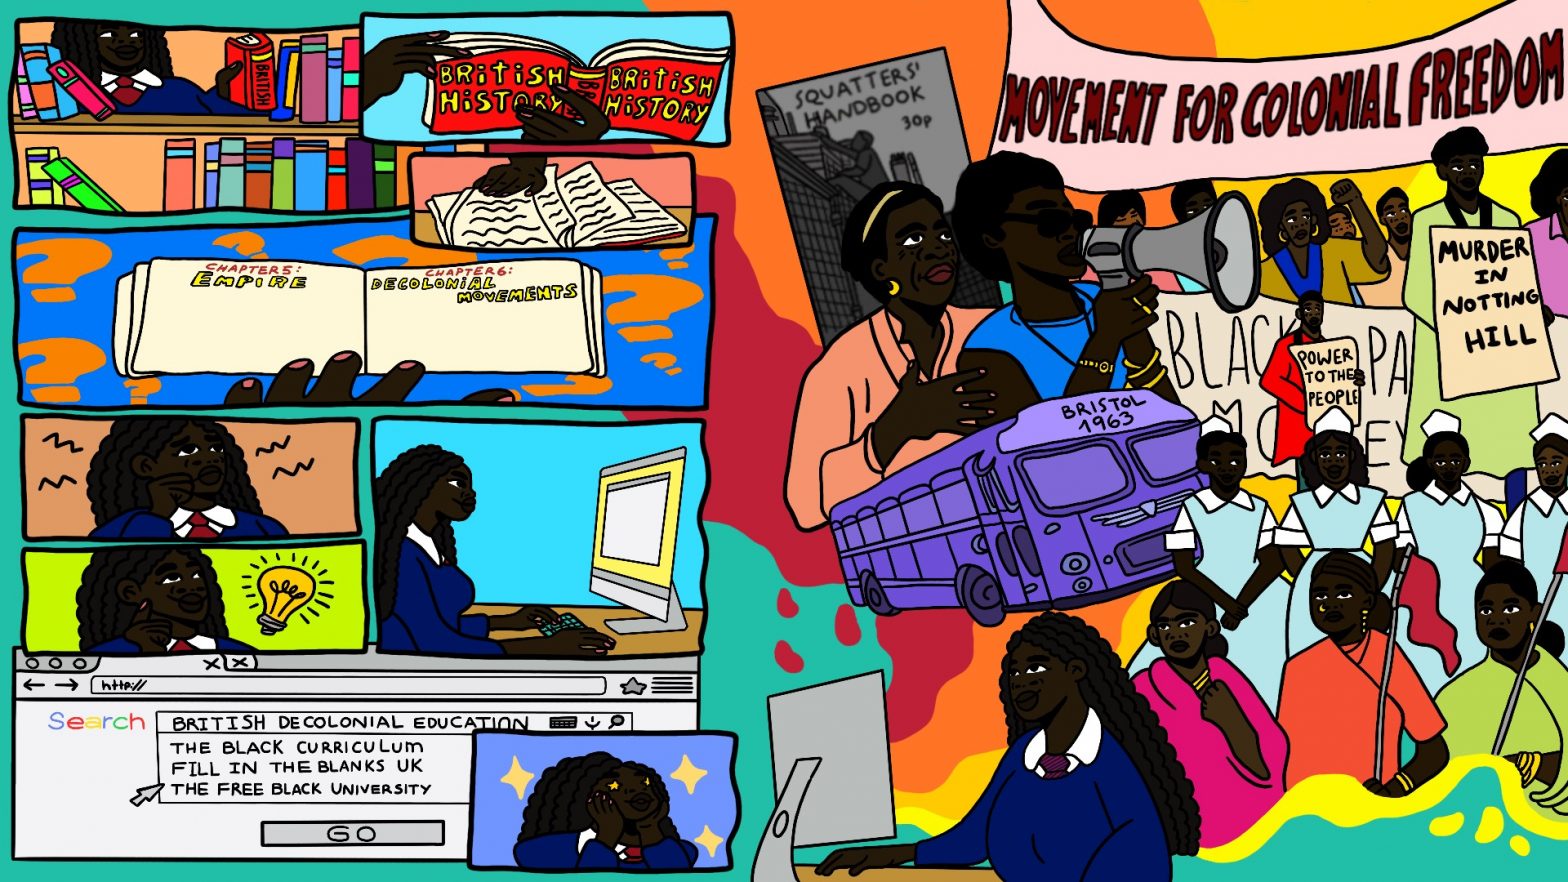 Comic book strip style slider image. On the left hand side of the image, a dark-skinned Black girl looks for a book on British history; she finds no information in the chapters on Empire and Decolonial movements. She has a lightbulb moment and searches online, where she finds resources from The Black Curriculum, Fill In The Blanks UK, and The Free Black University. She has stars in her eyes! On the right side of the image, the girl sits on the computer, and behind her there is a visualisation of all the things she is learning about, including a banner reading "Movement for Colonial Freedom', a Bristol bus in 1963 and a placard reading "Murder in Notting Hill"